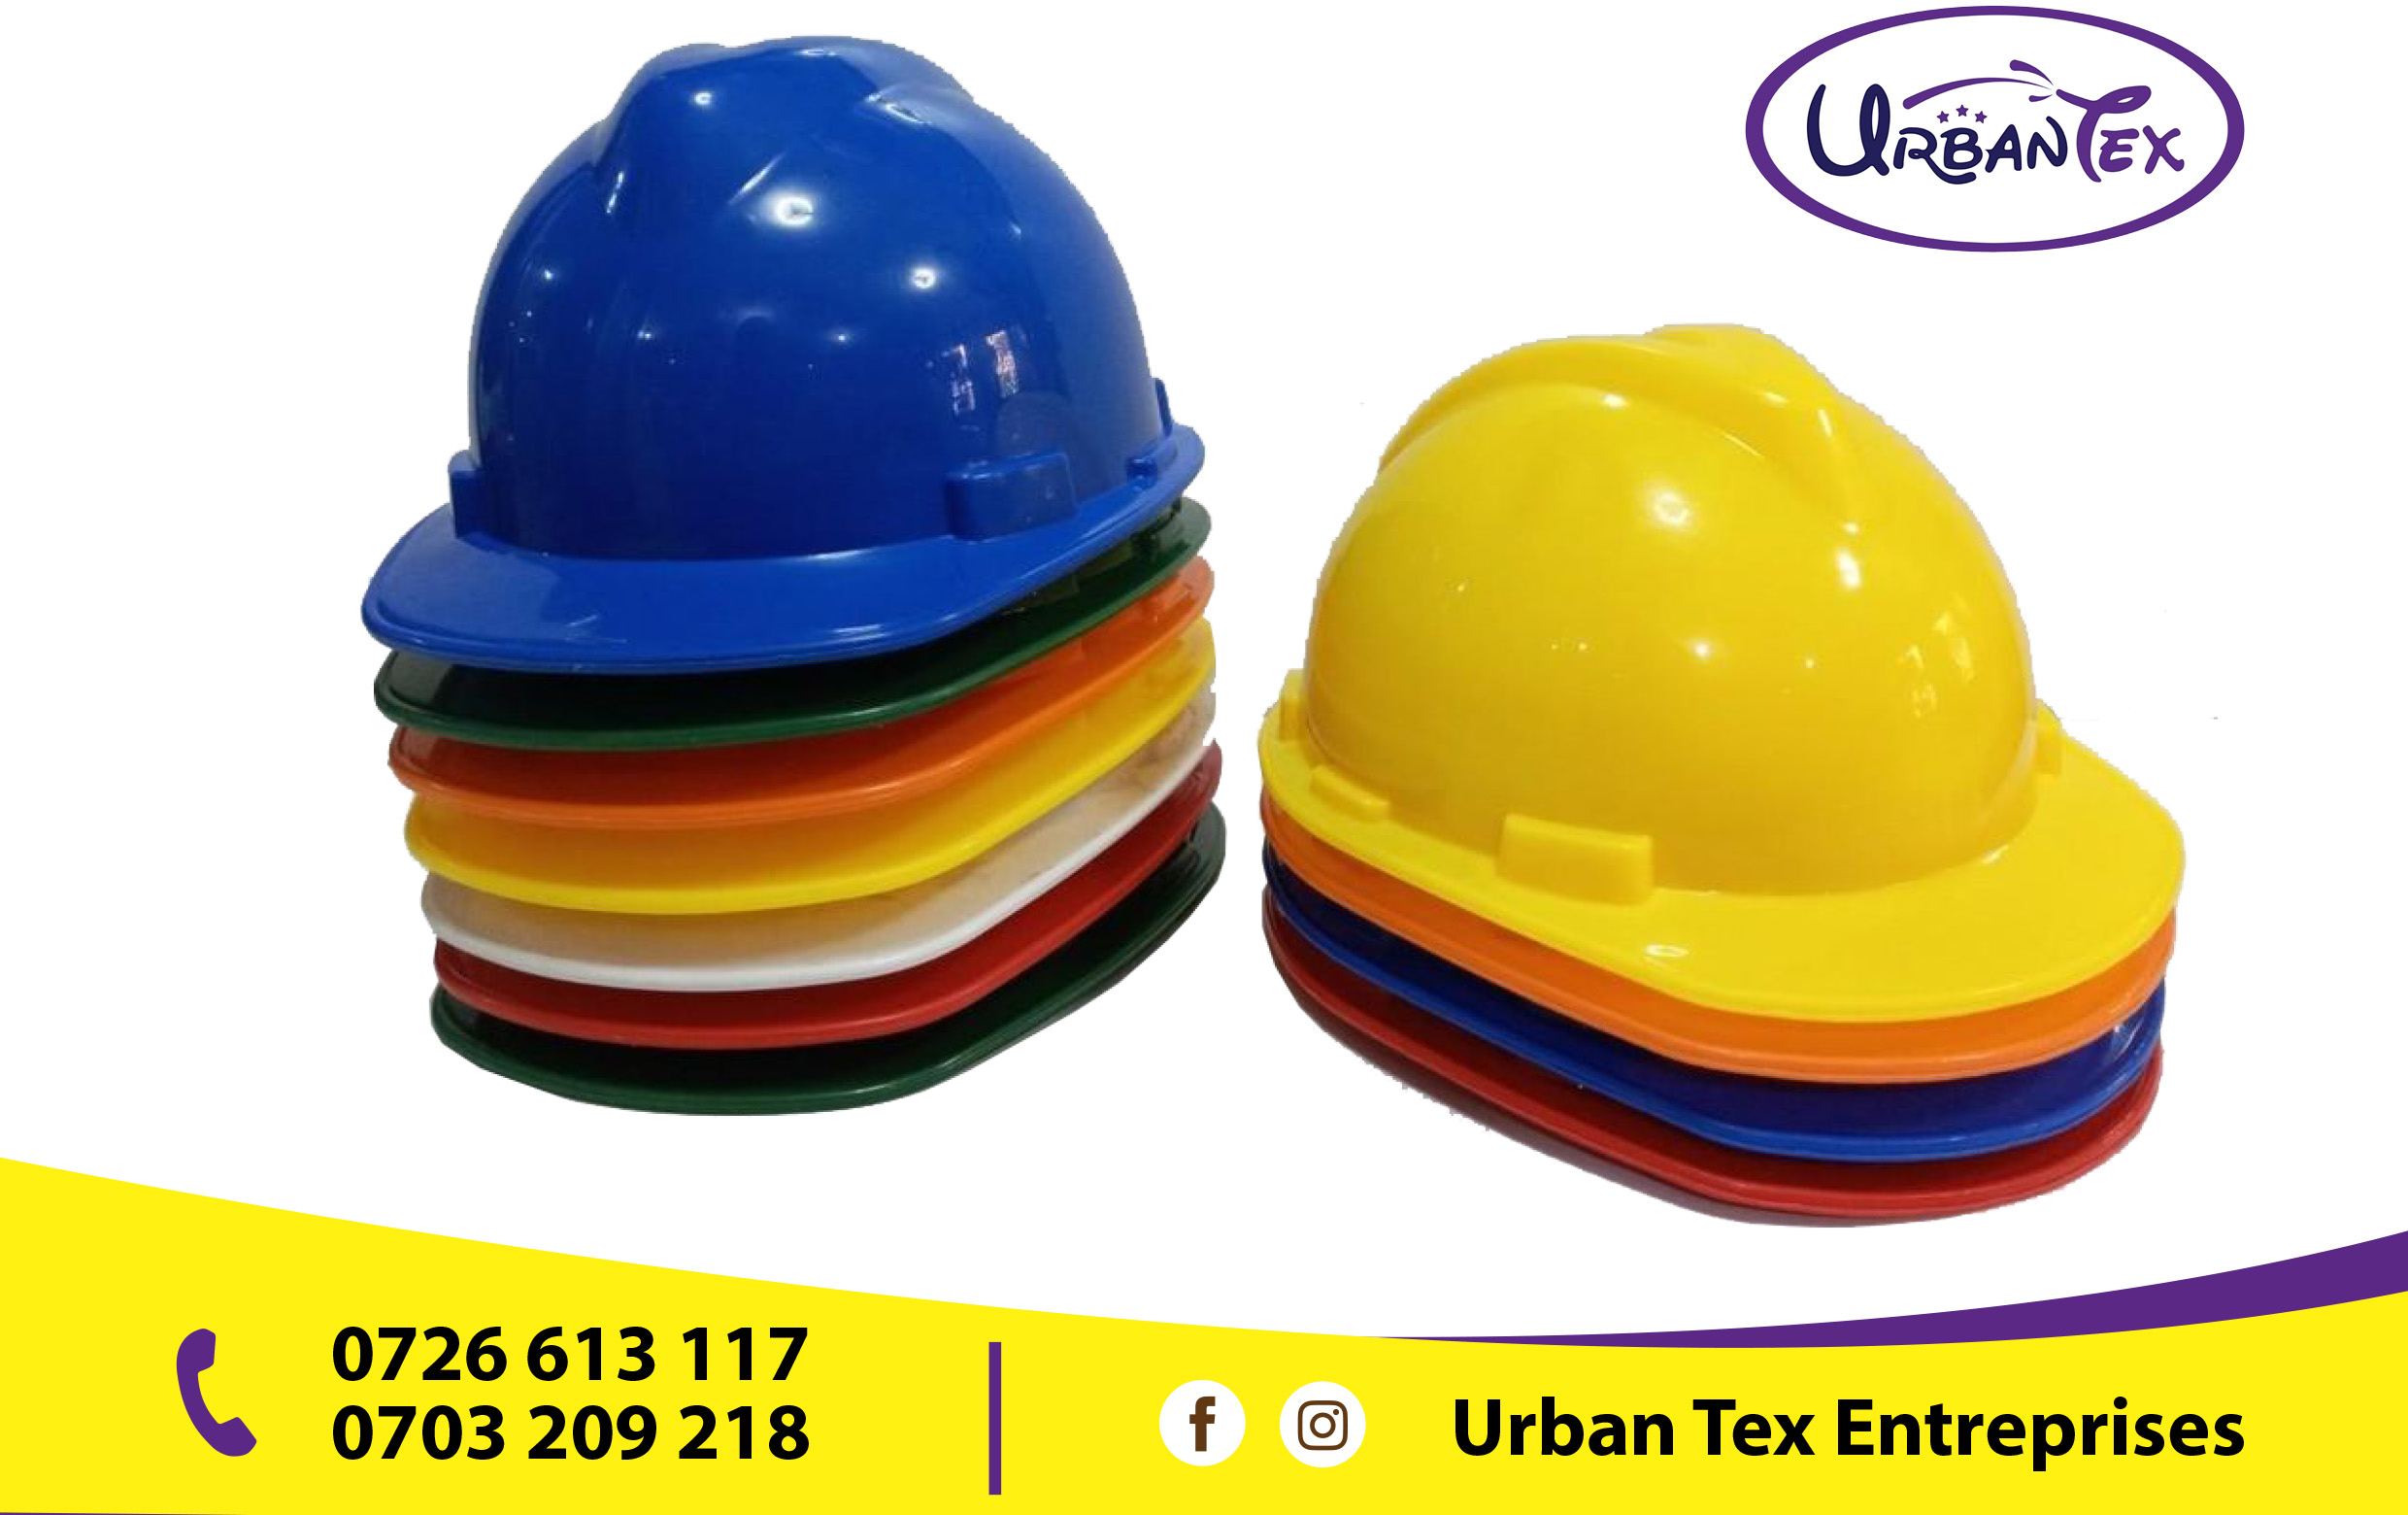 How  to Shop from the best Safety Helmets Suppliers in Nairobi